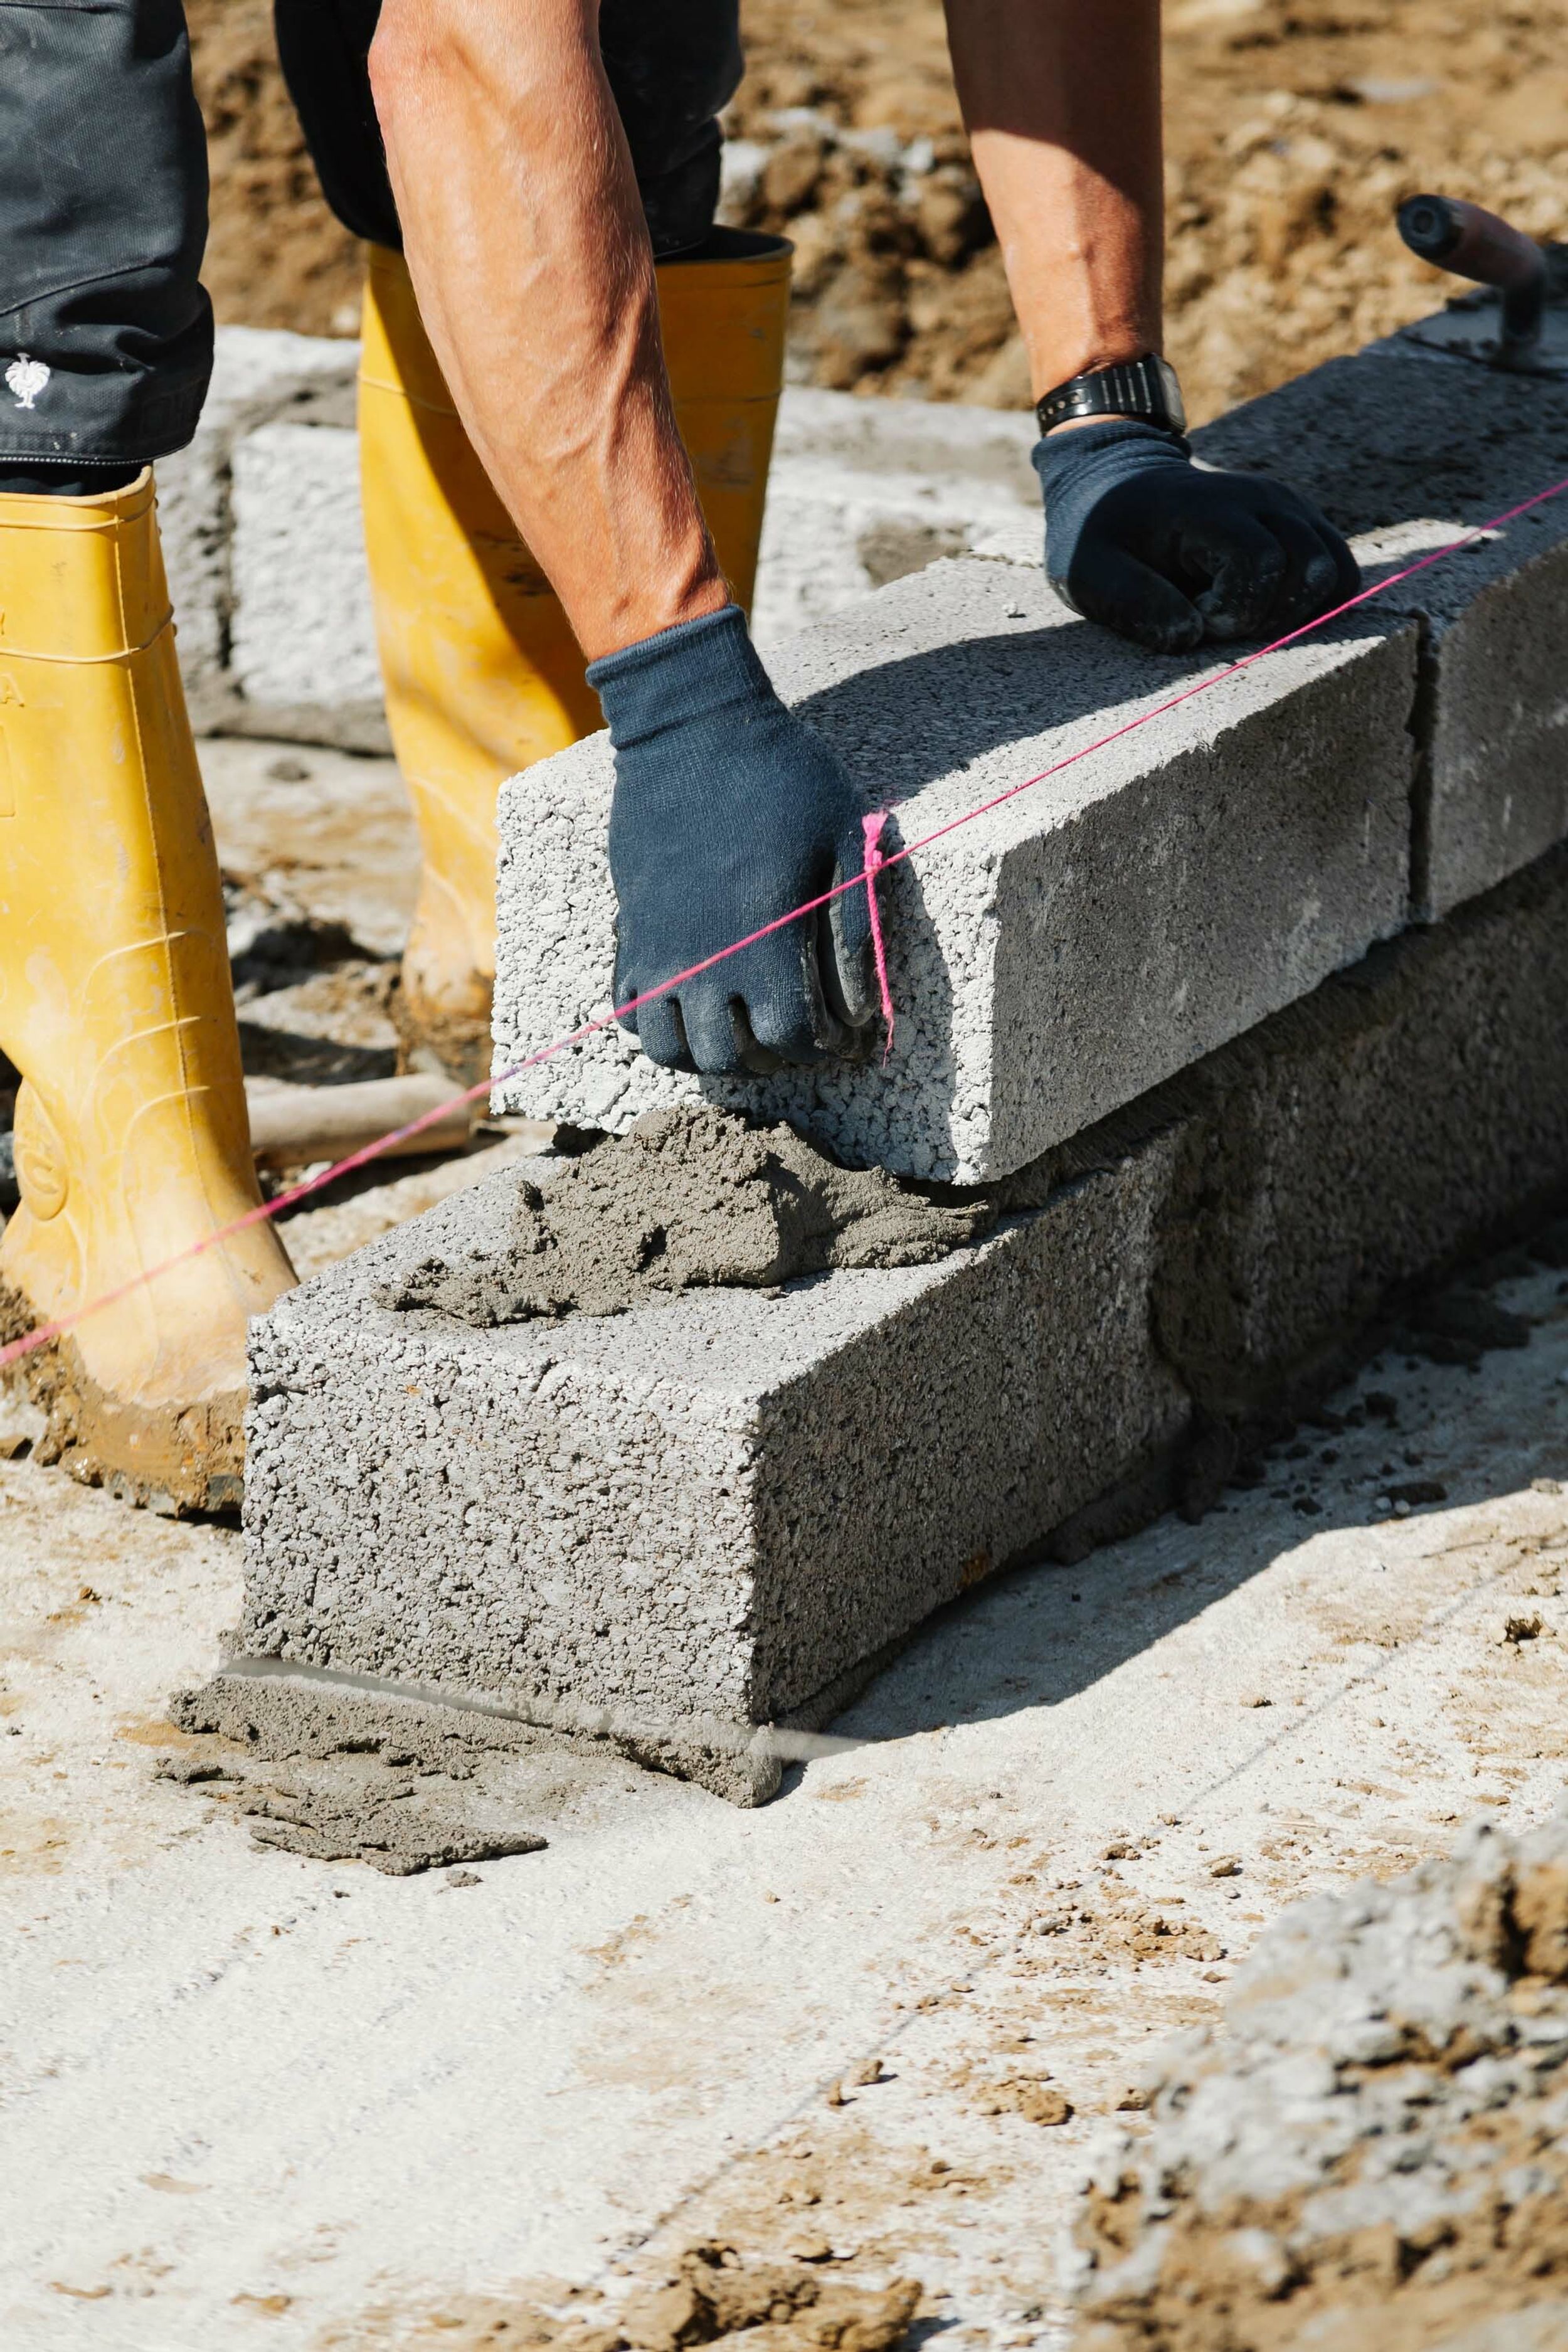 A construction worker lays concrete blocks in wet cement to build the finished floor height of a new build home.